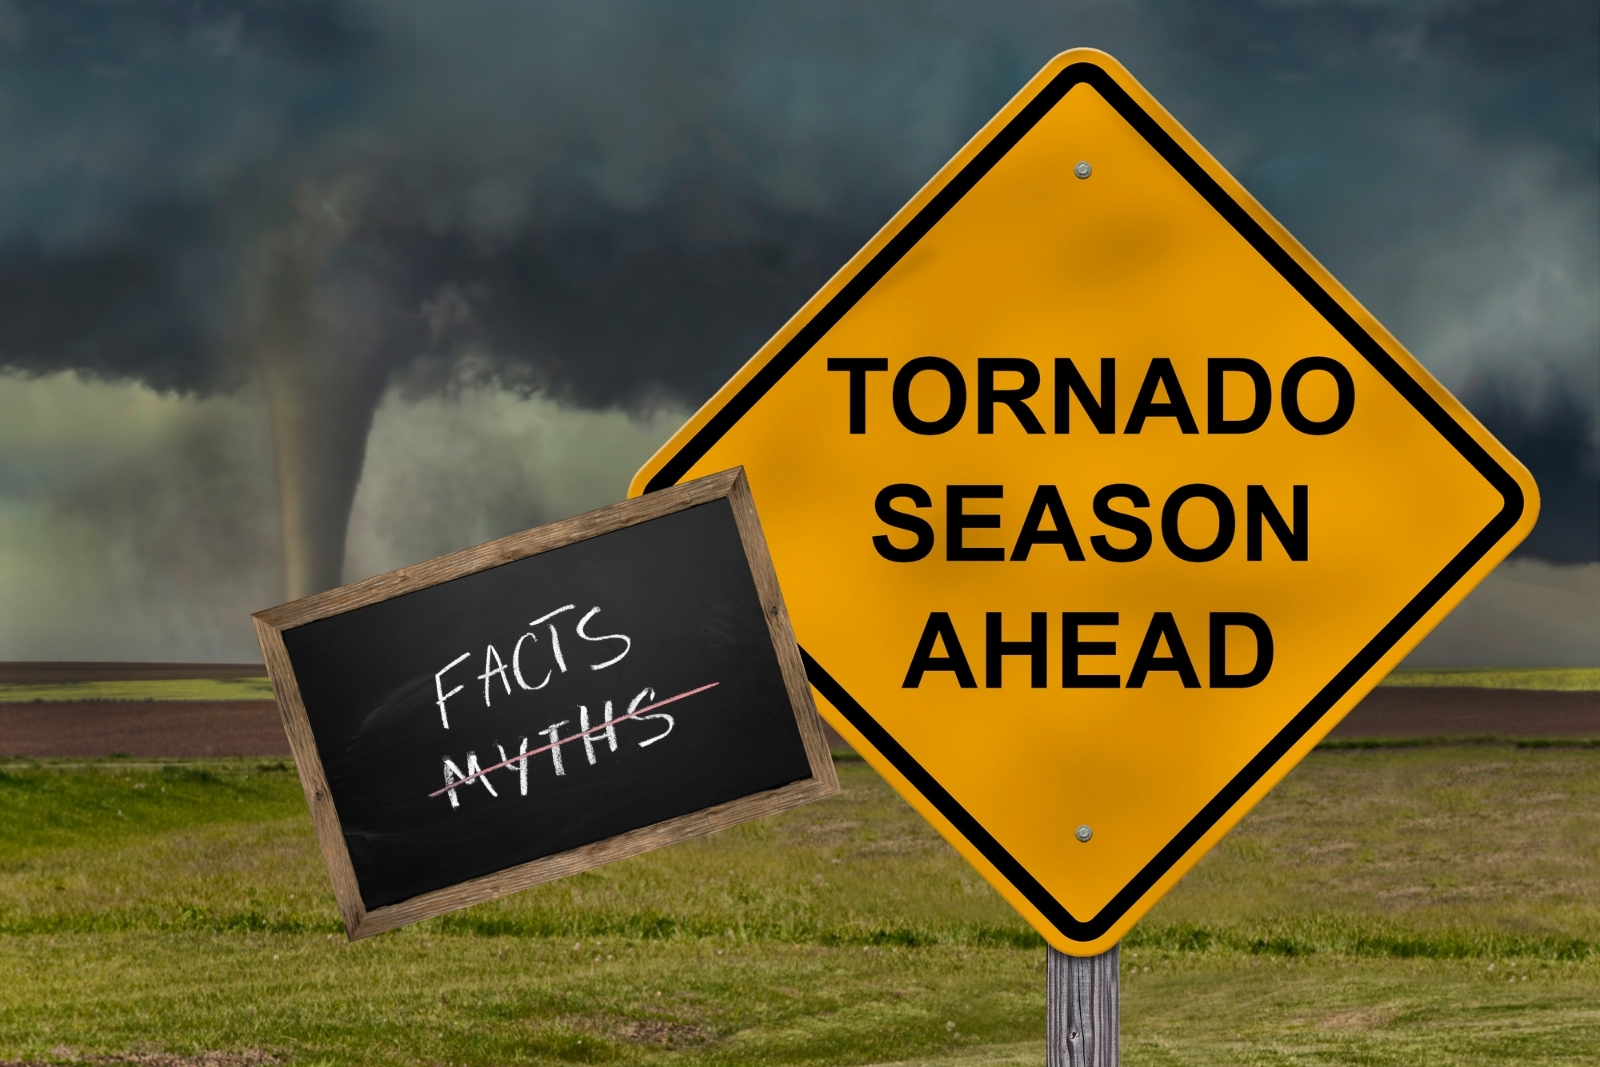 Prepare for Severe Weather in South Dakota – Don’t Believe These 5 Common Tornado Myths